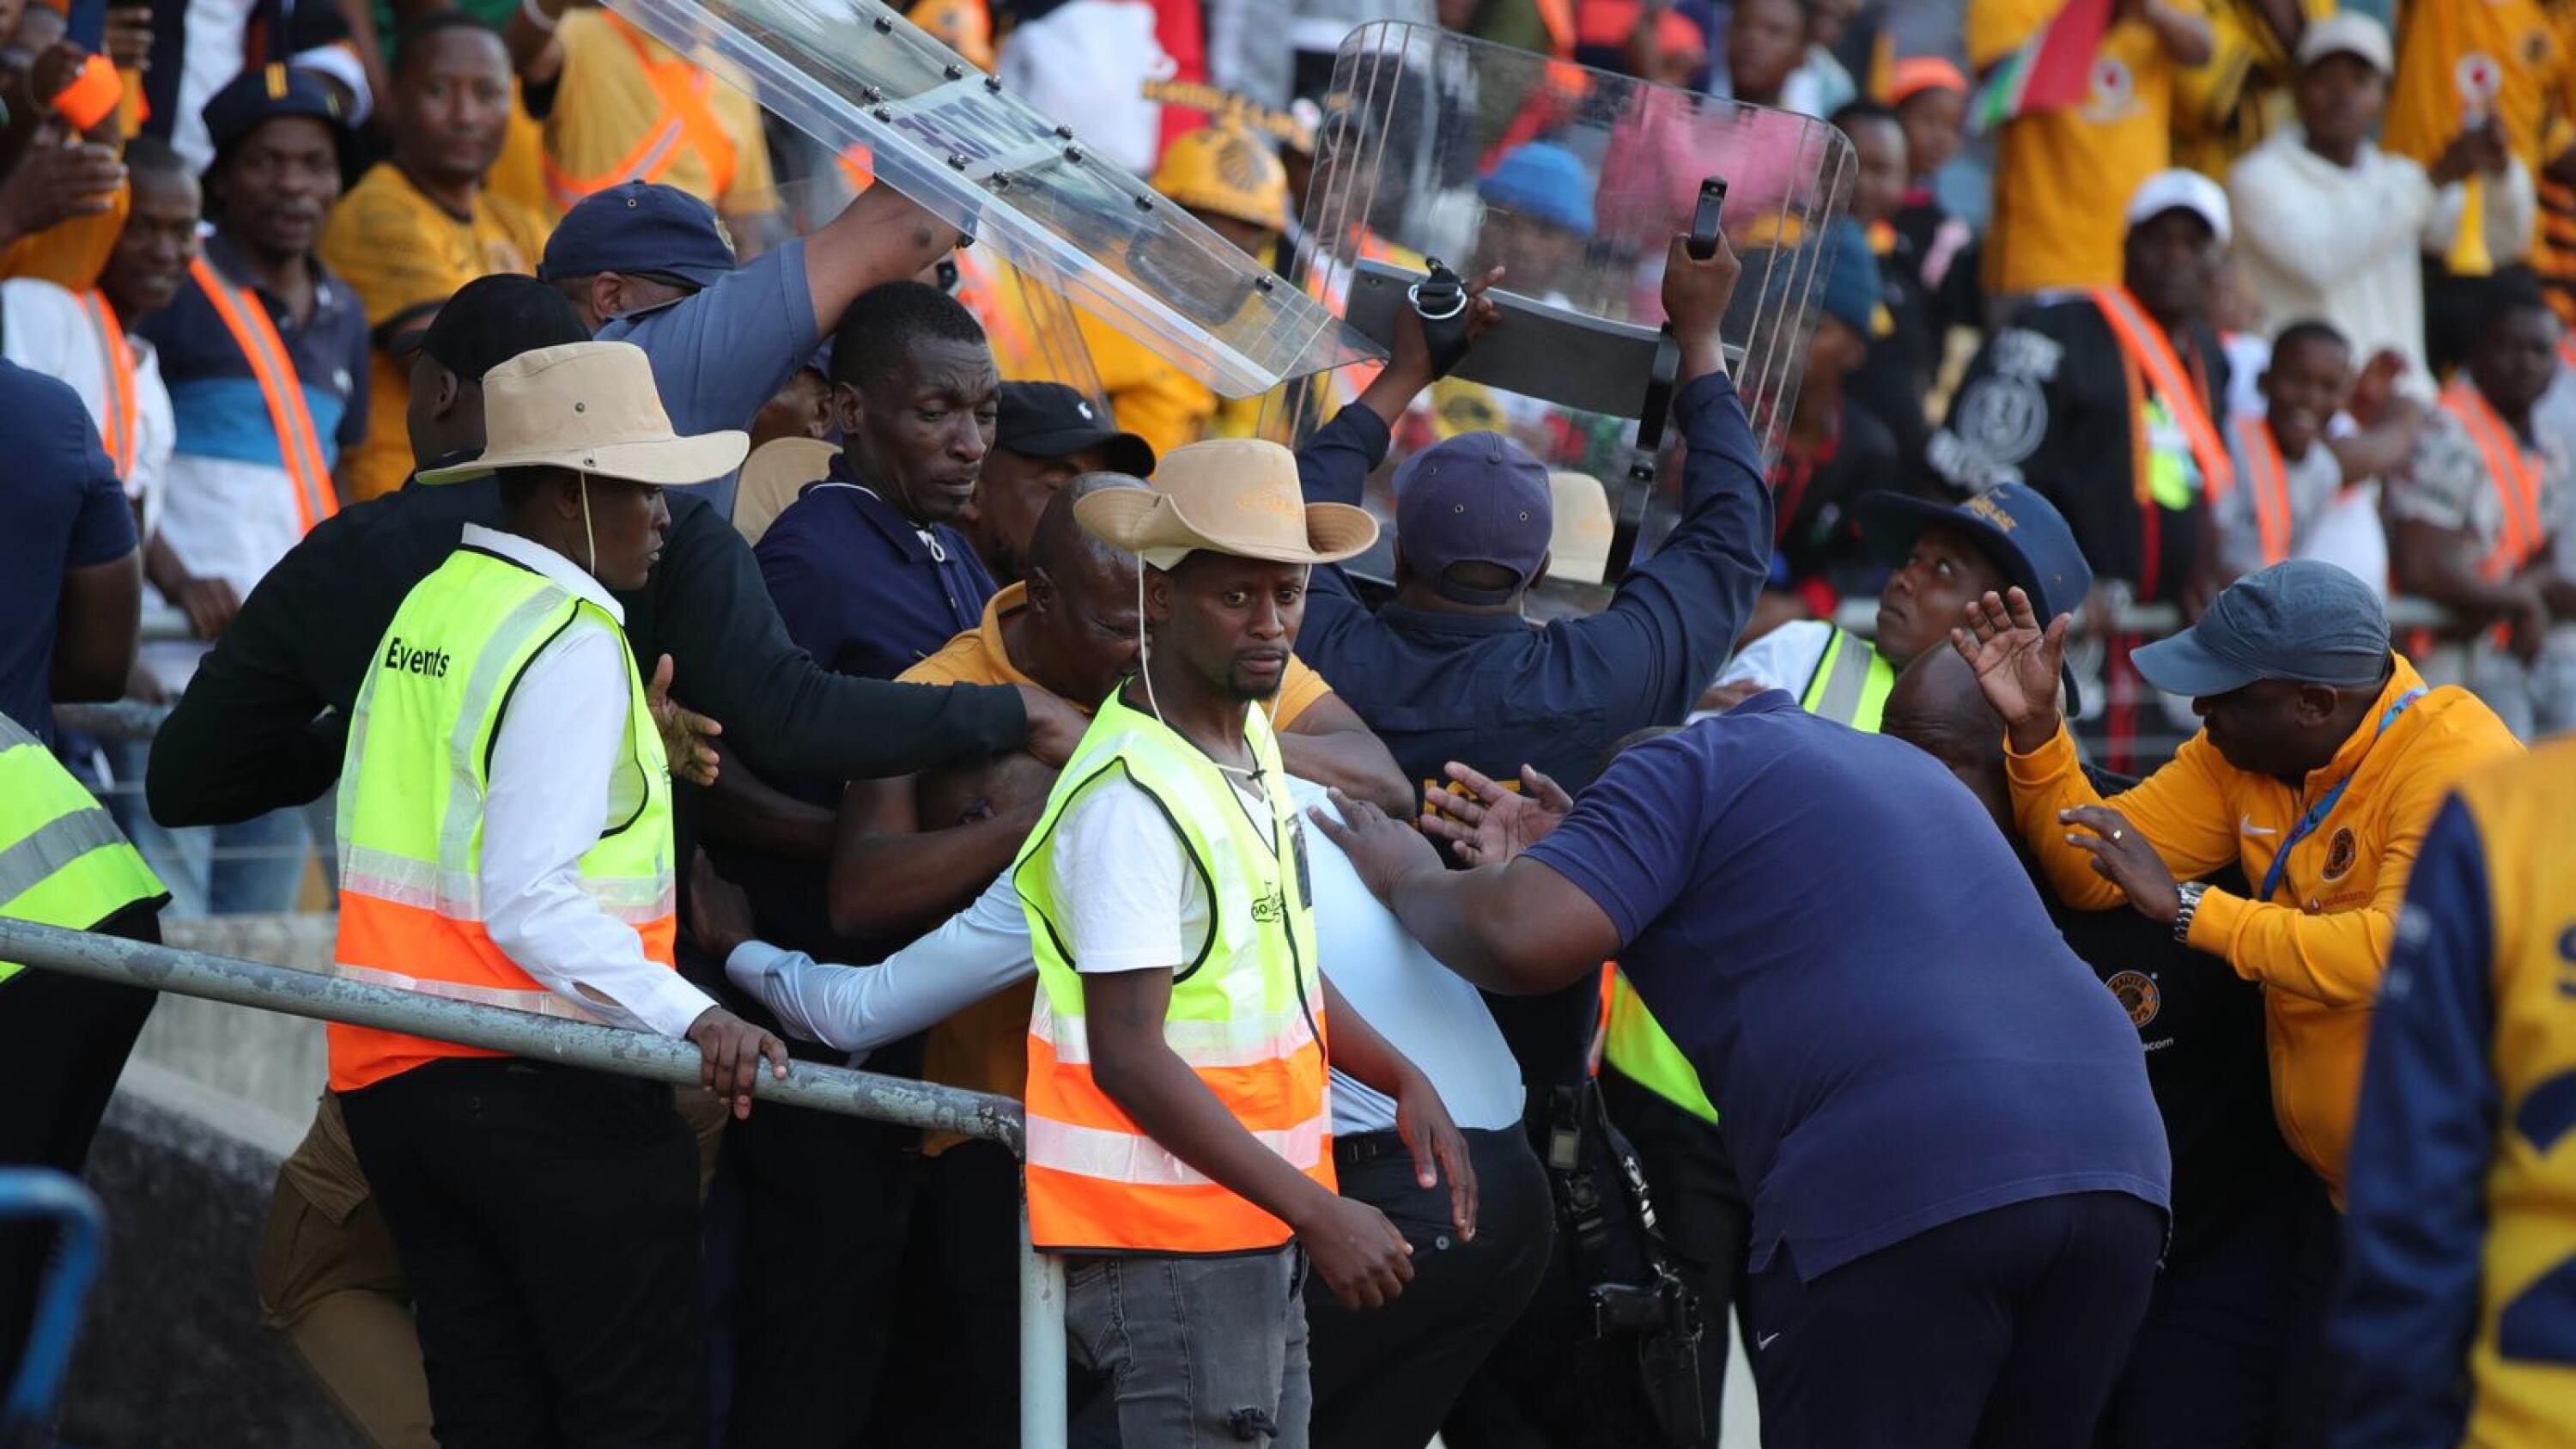 Kaizer Chiefs head coach Arthur Zwane is escorted by police after being attacked by the club’s fans after their DStv Premiership match against Supersport United at Royal Bafokeng Stadium in Rustenburg on Saturday